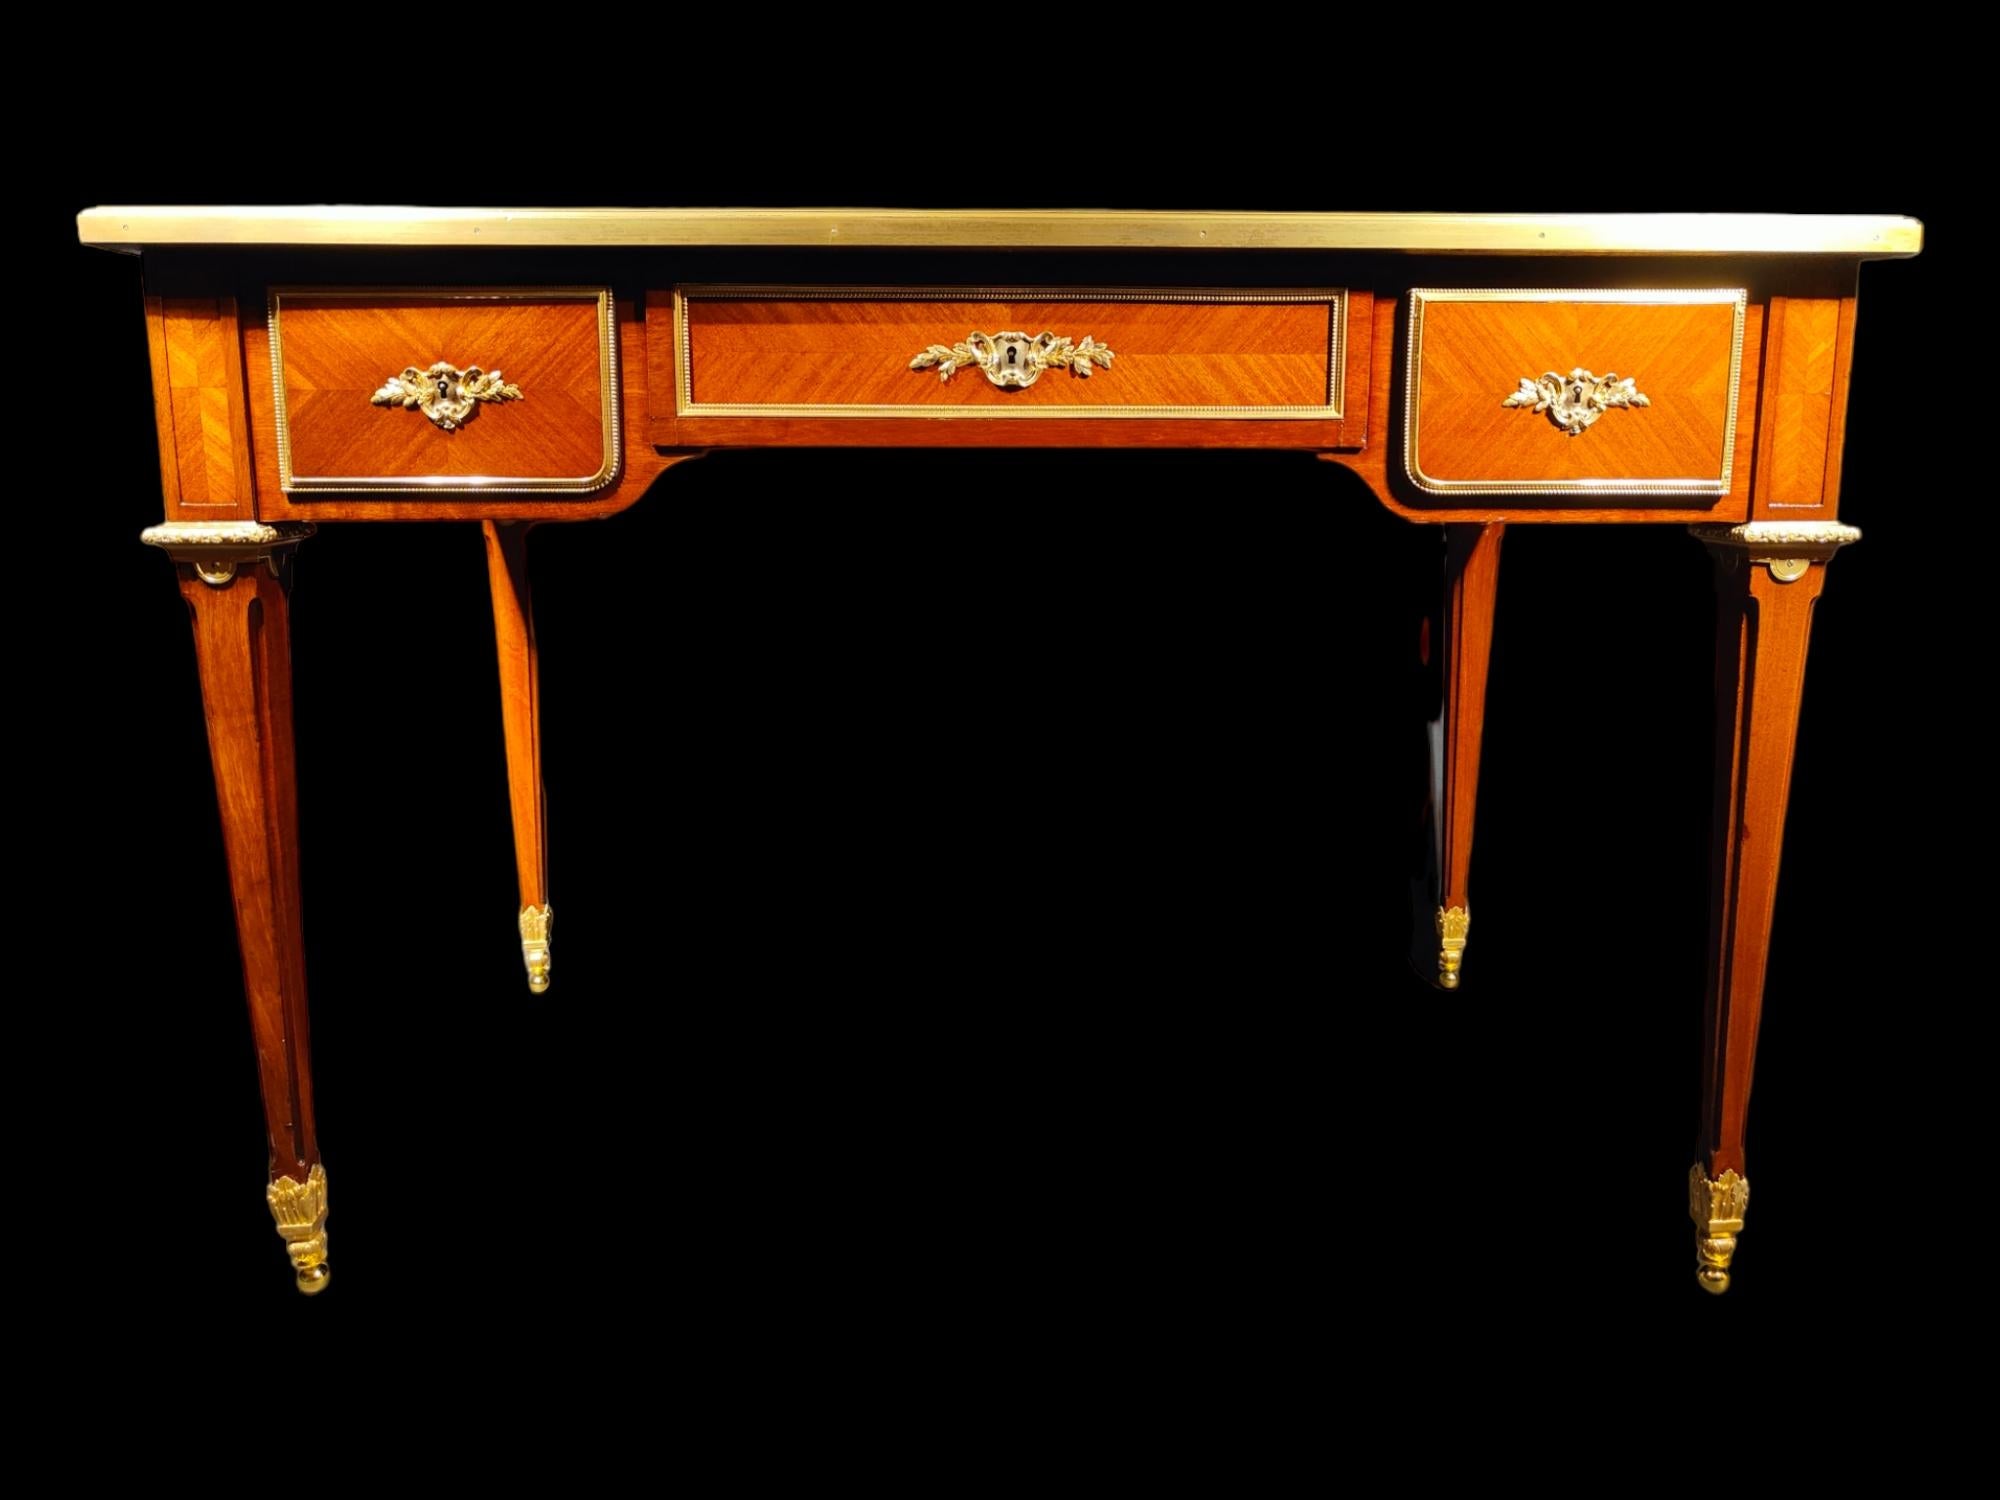 A very fine gilt bronze mounted tulipwood and amaranth desk.
by L. Cueunières (active from 1870).
A french ormolu-mounted mahogany bureau plat.
By l. Cueunieres, third quarter 19th century.
The moulded rectangular top with gilt-tooled yellow